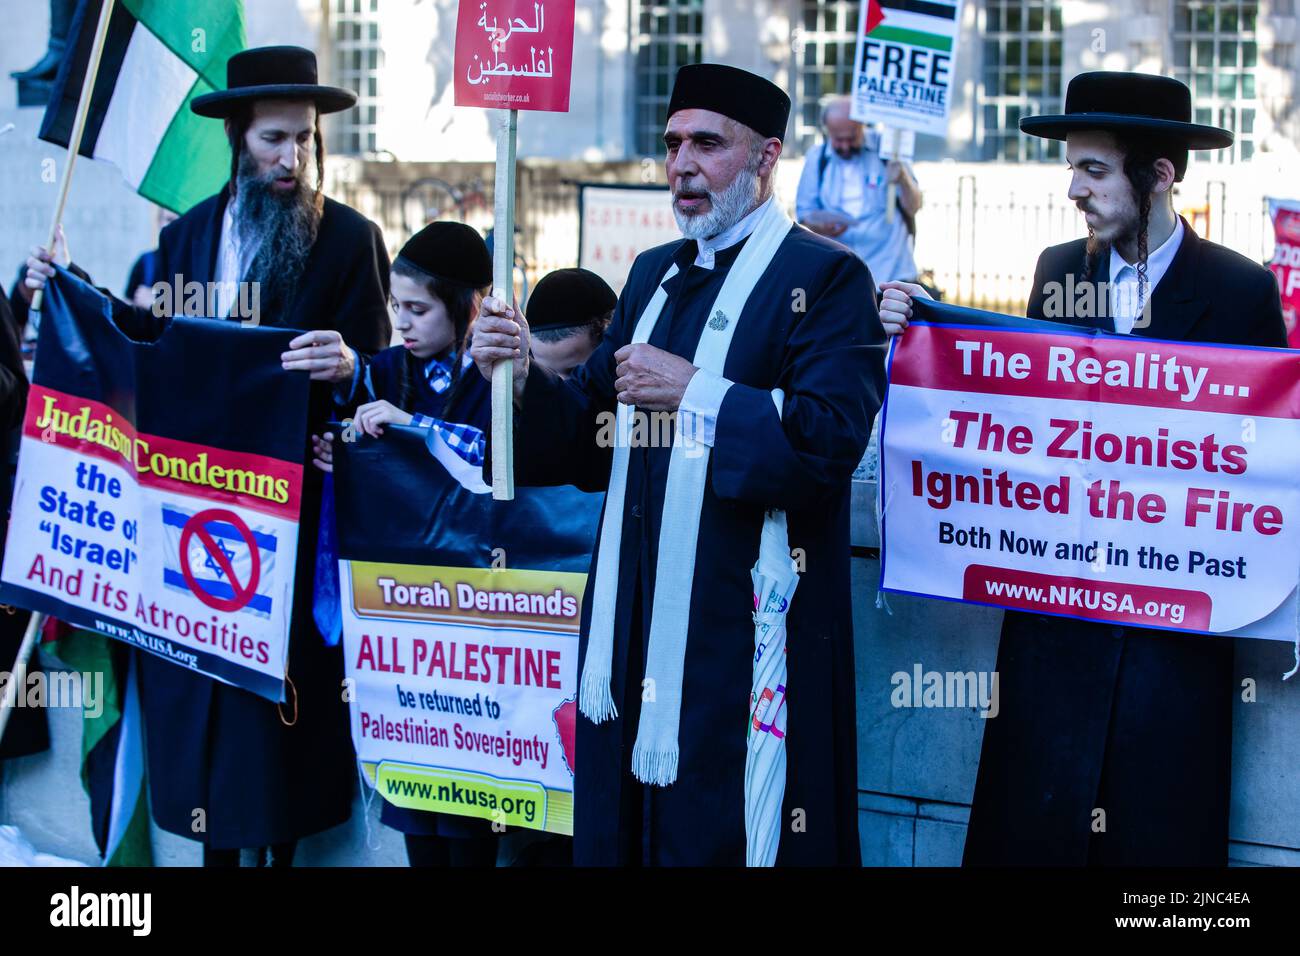 London, UK. 10th August 2022. A Muslim cleric stands with members of Neturei Karta, a group of ultra-Orthodox Jews which campaigns against Zionism, at a Rally for Palestine opposite Downing Street. At least 47 Palestinians, including 16 children, were killed and hundreds more injured during a three-day bombardment of Gaza by Israeli forces named Operation Truthful Dawn. Credit: Mark Kerrison/Alamy Live News Stock Photo